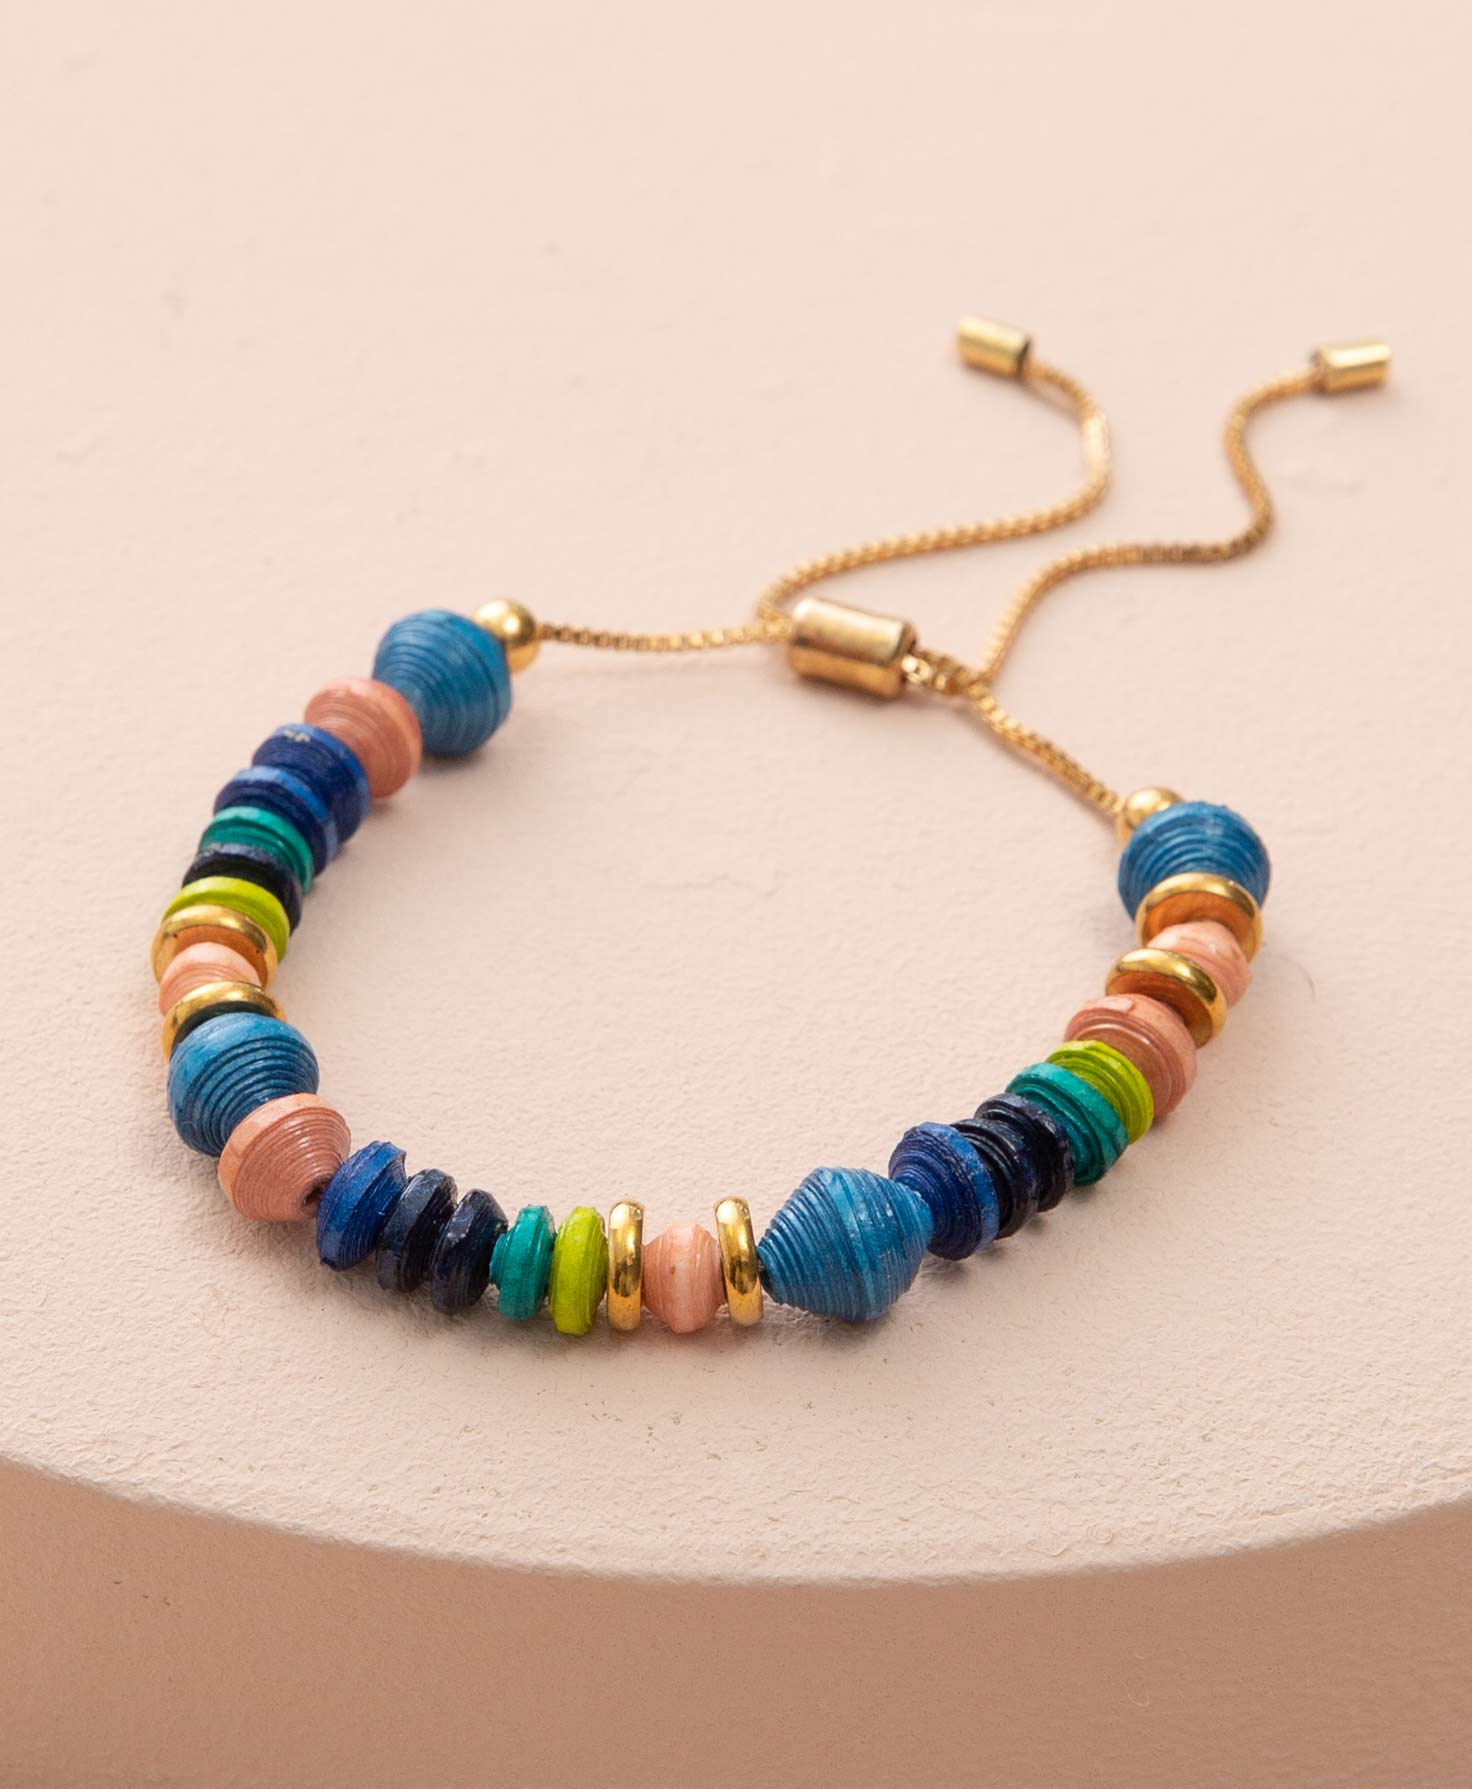 The Bevy Bracelet lays on a peach-colored block. Hand-rolled paper beads in alternating shades of blush, blue, navy, turquoise, and lime green are strung on a dainty gold chain. The paper beads have a variety of shapes. Some are disc-shaped while others are round. The bracelet is accented with a few gold metal discs. The closure of the bracelet is adjustable and can be tightened by pulling the two ends of the chain in opposite directions. 